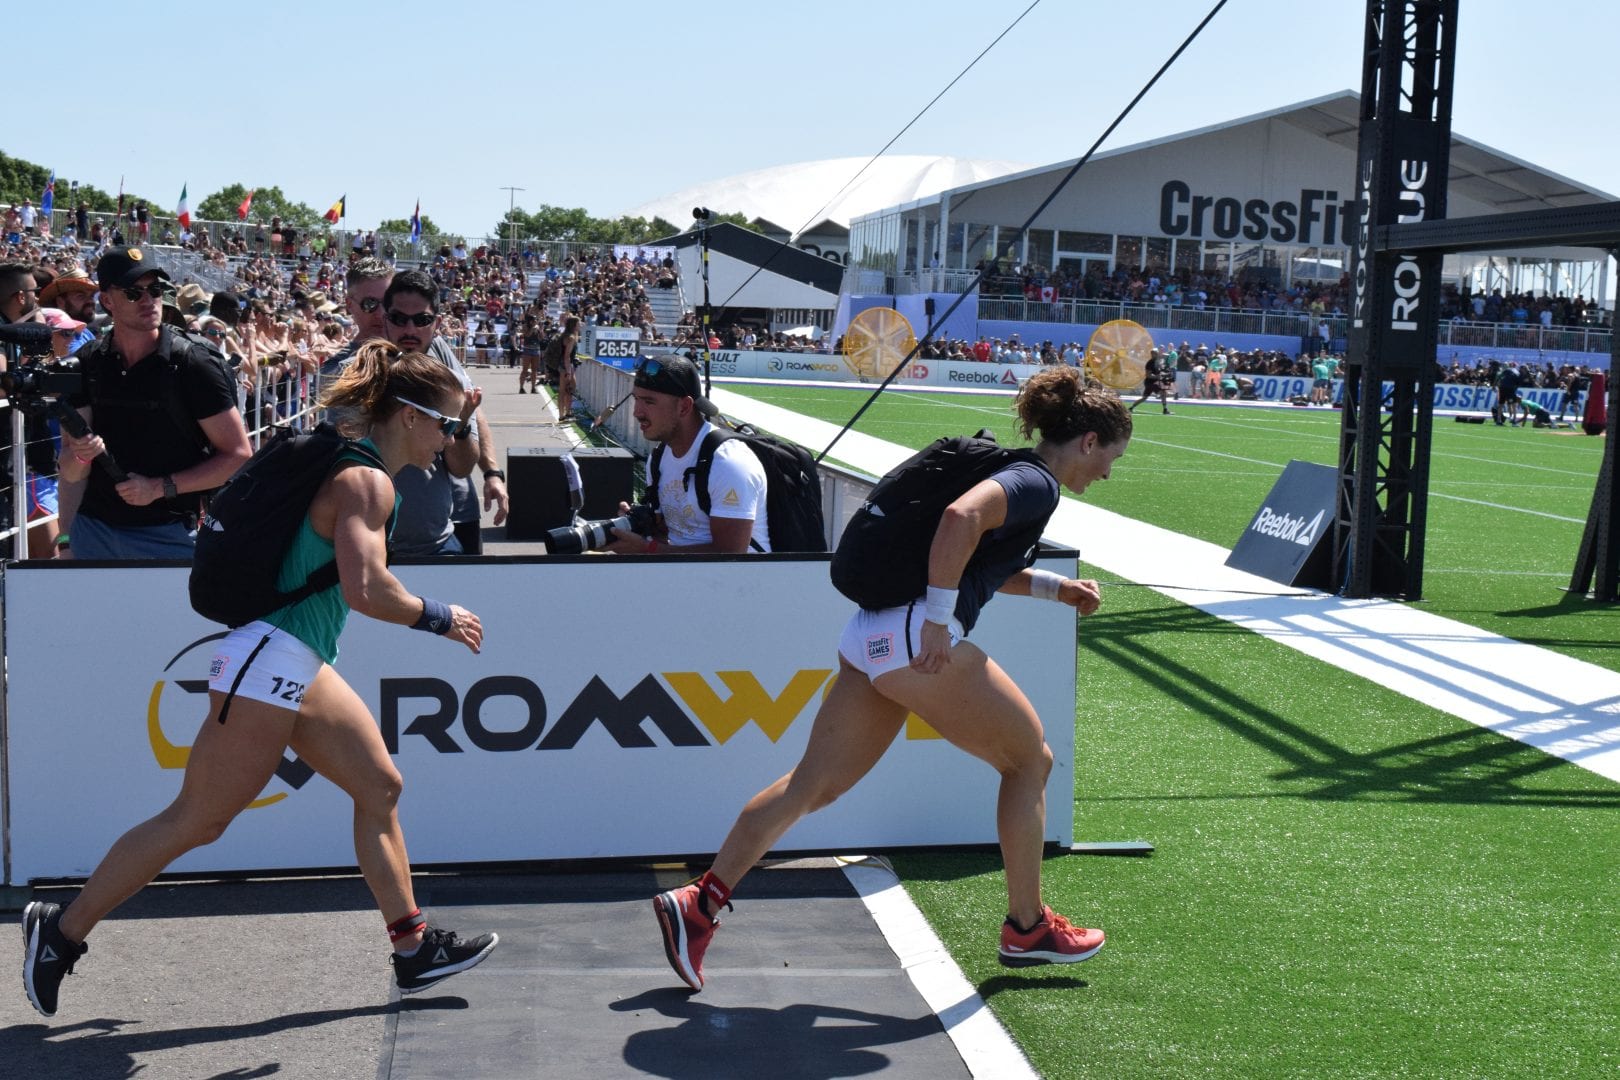 Tia-Clair Toomey completes the Ruck Run event at the 2019 CrossFit Games